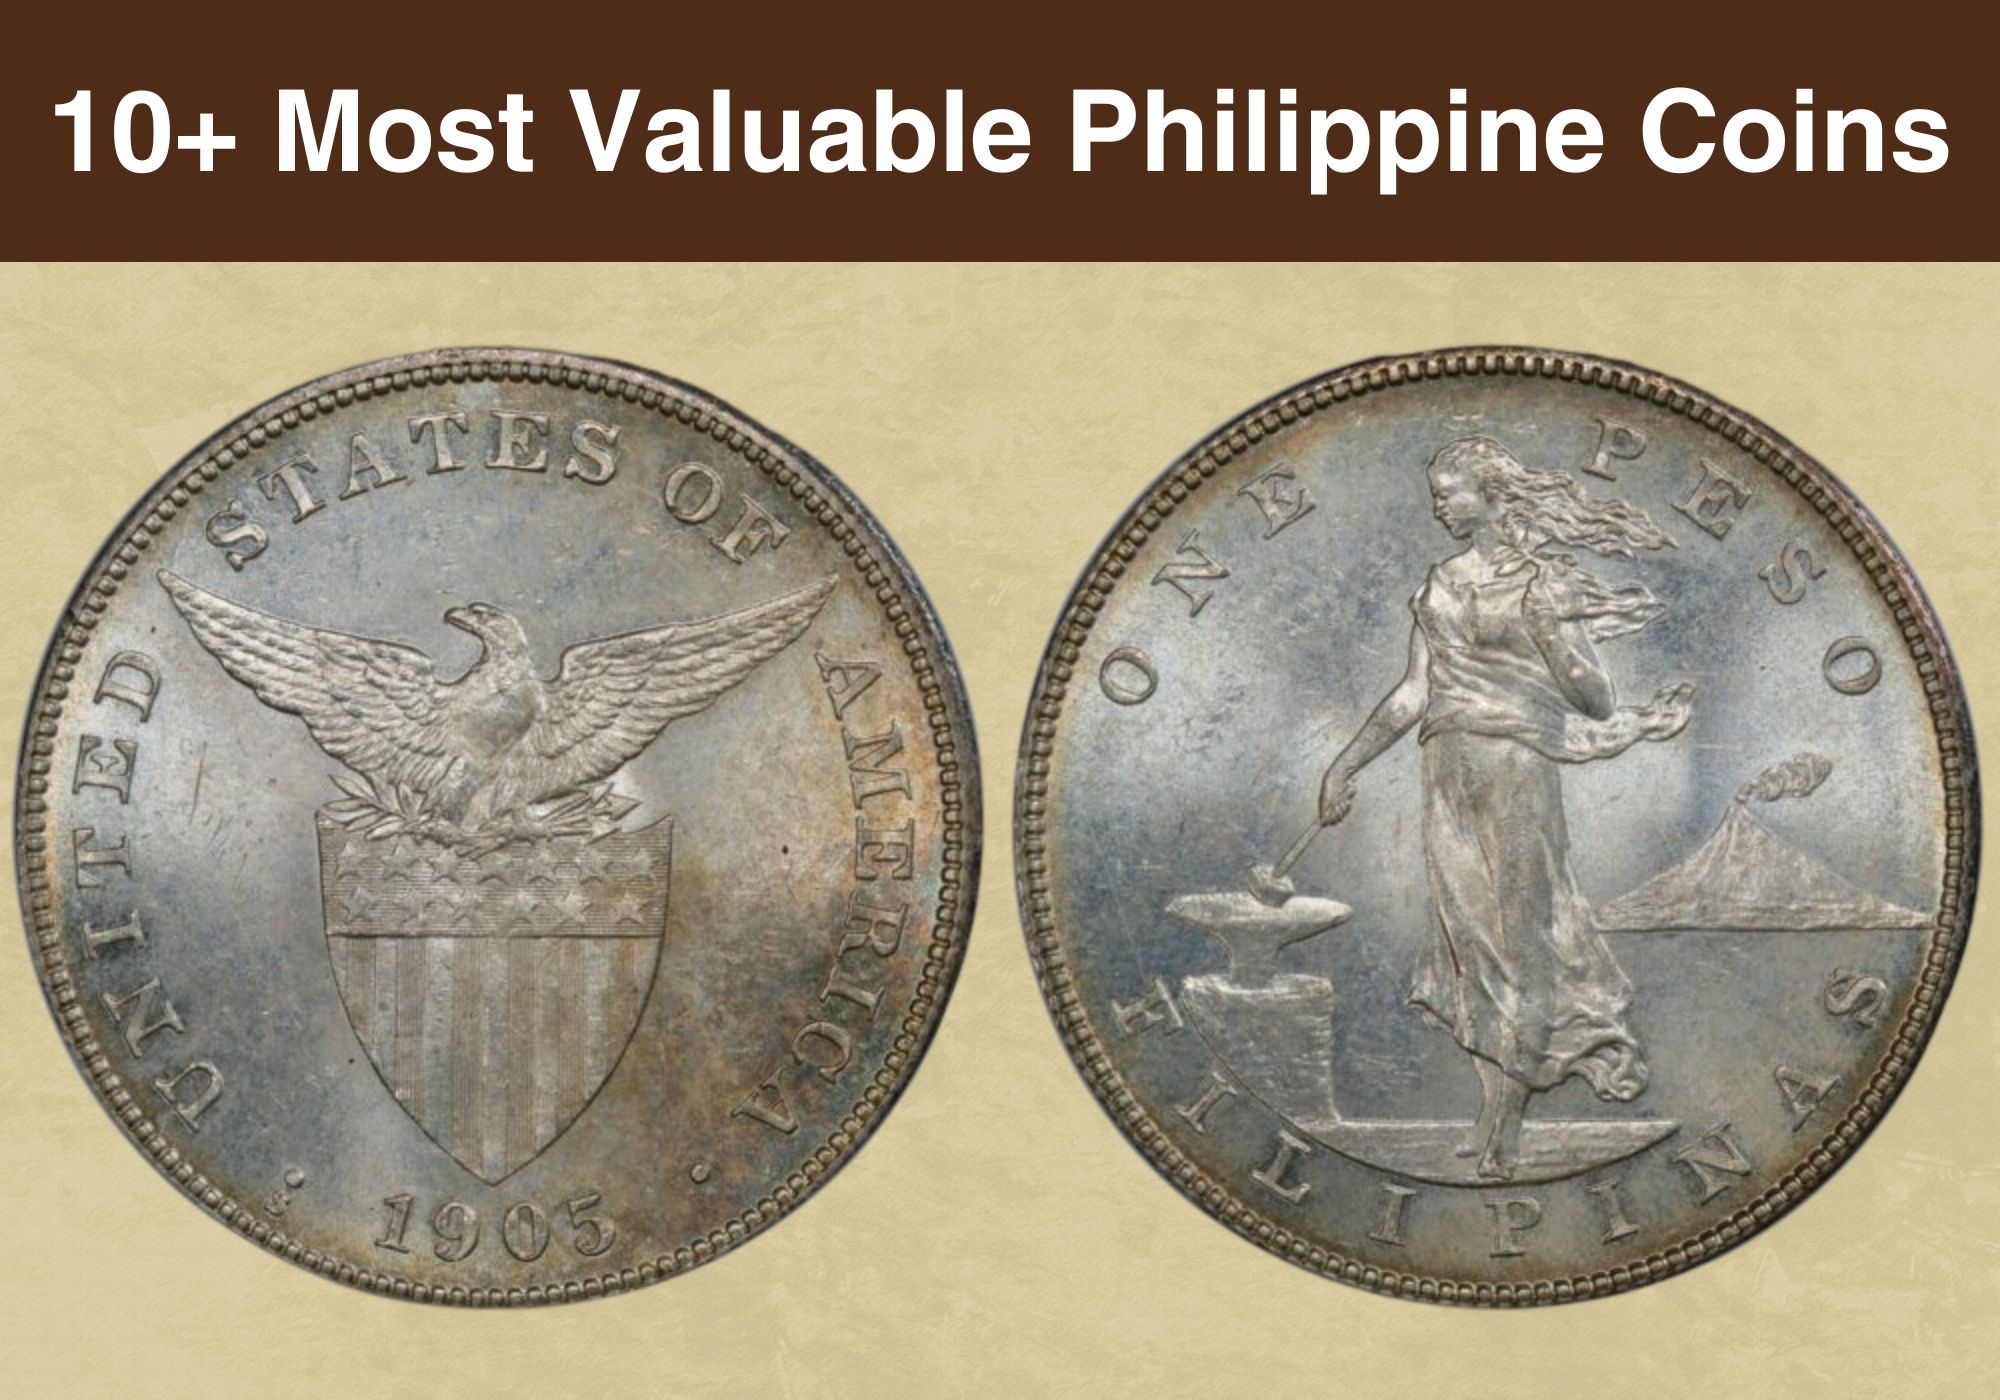 10+ Most Valuable Philippine Coins